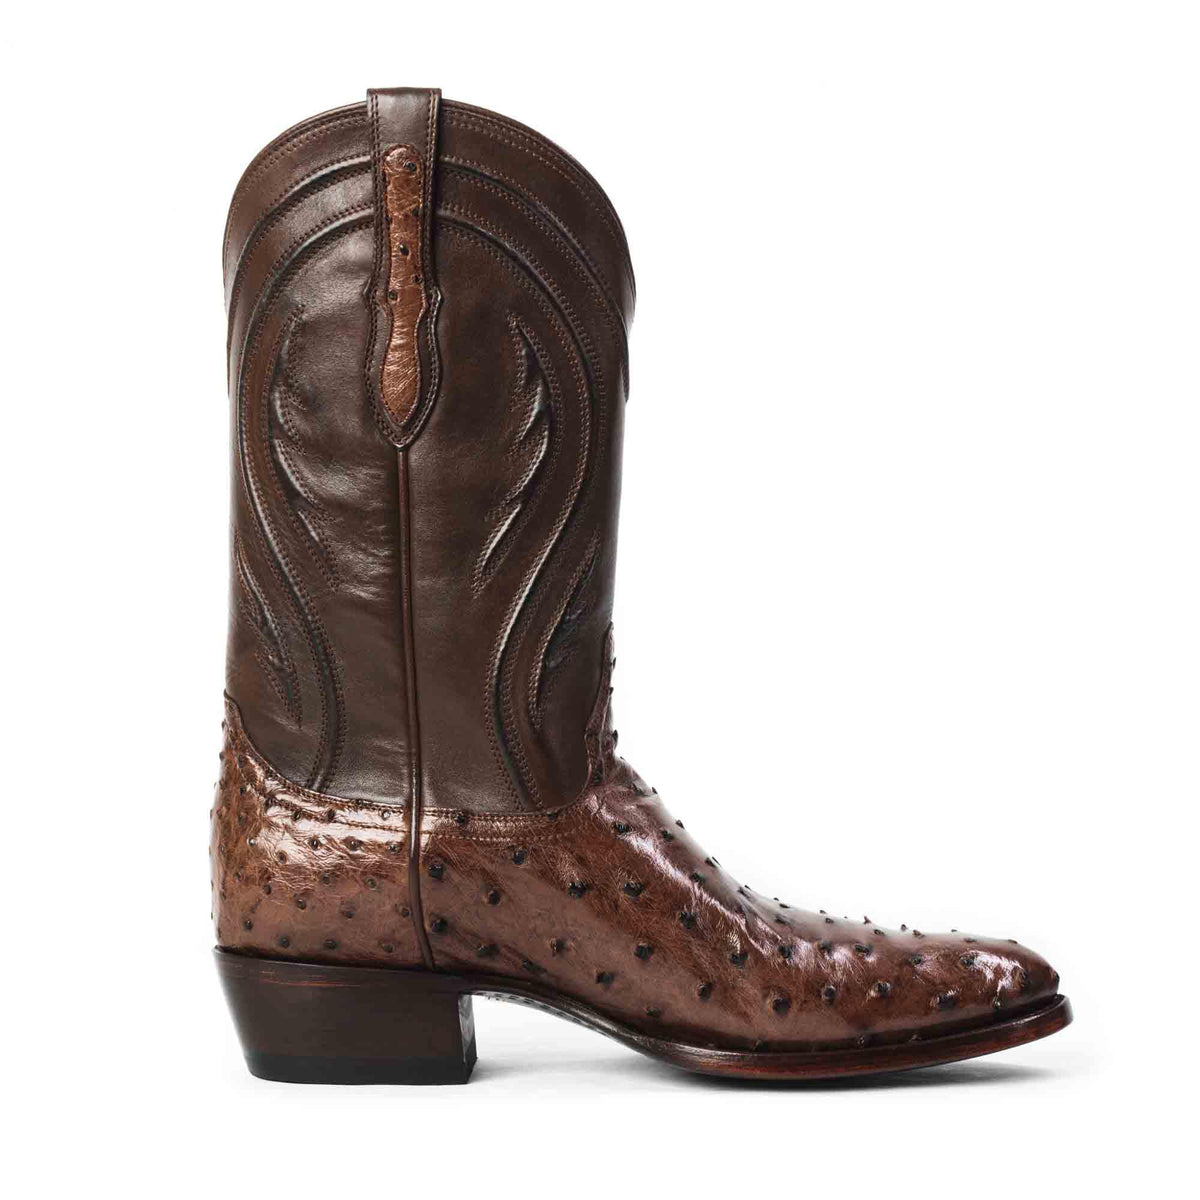 Full-Quill Ostrich Western Cowboy Boot by RUJO